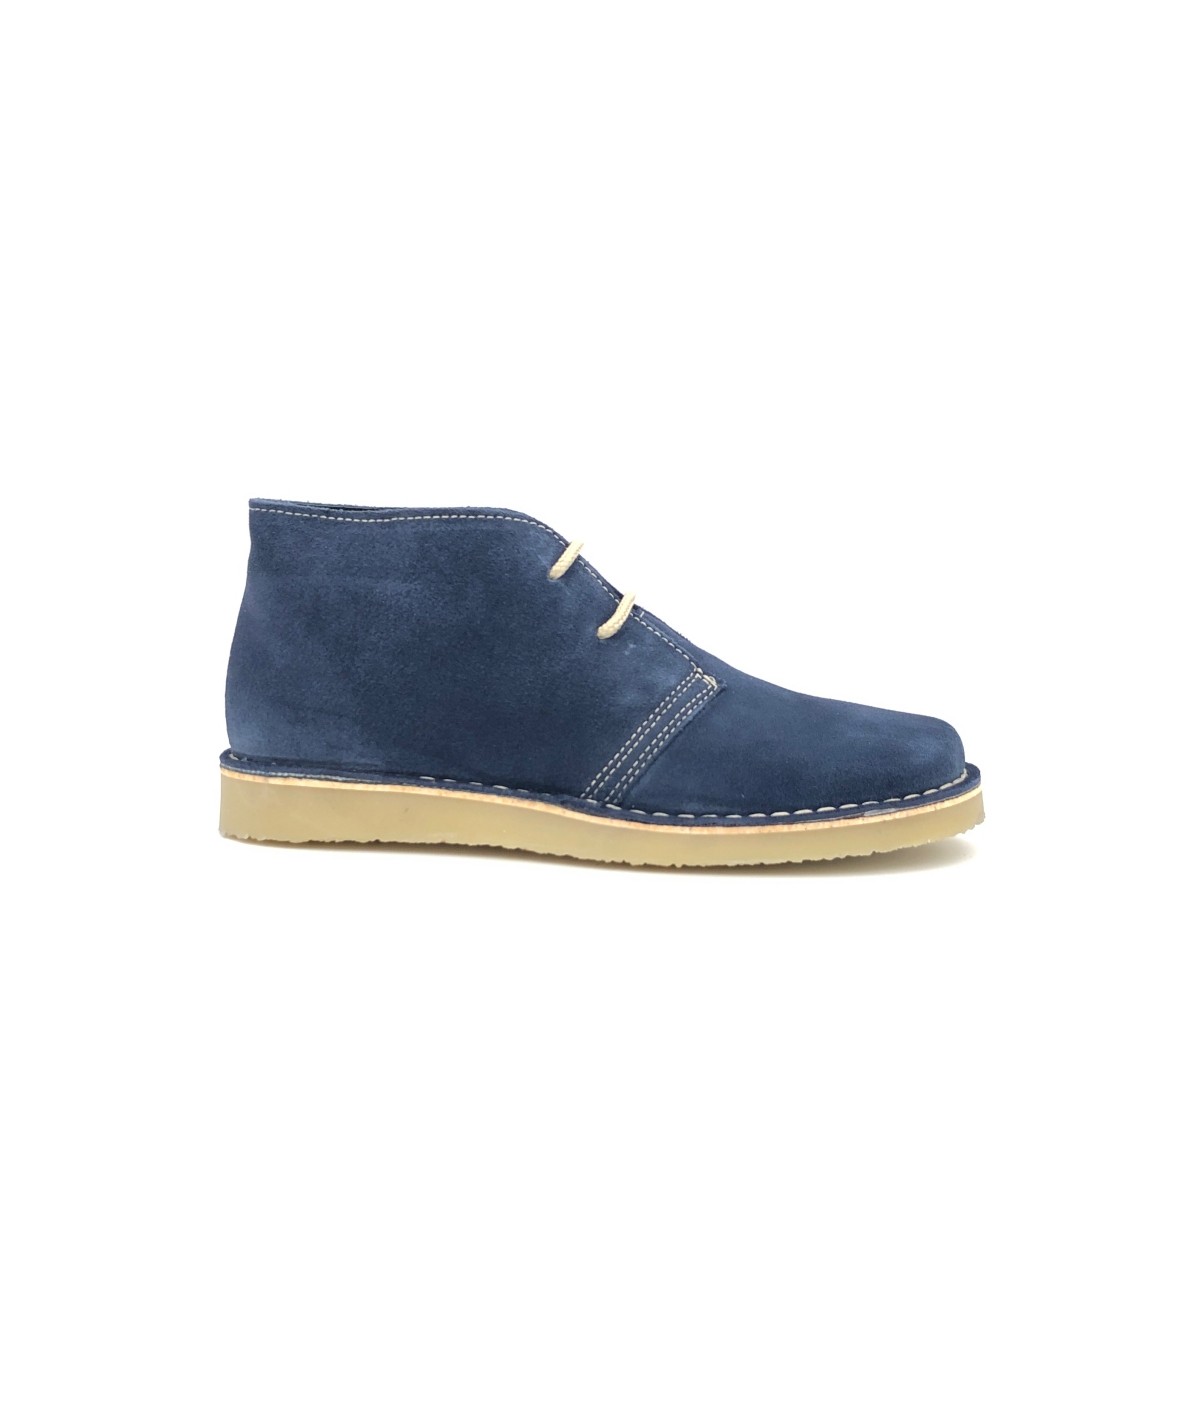 Jeans color desert boots with Dover sole for men